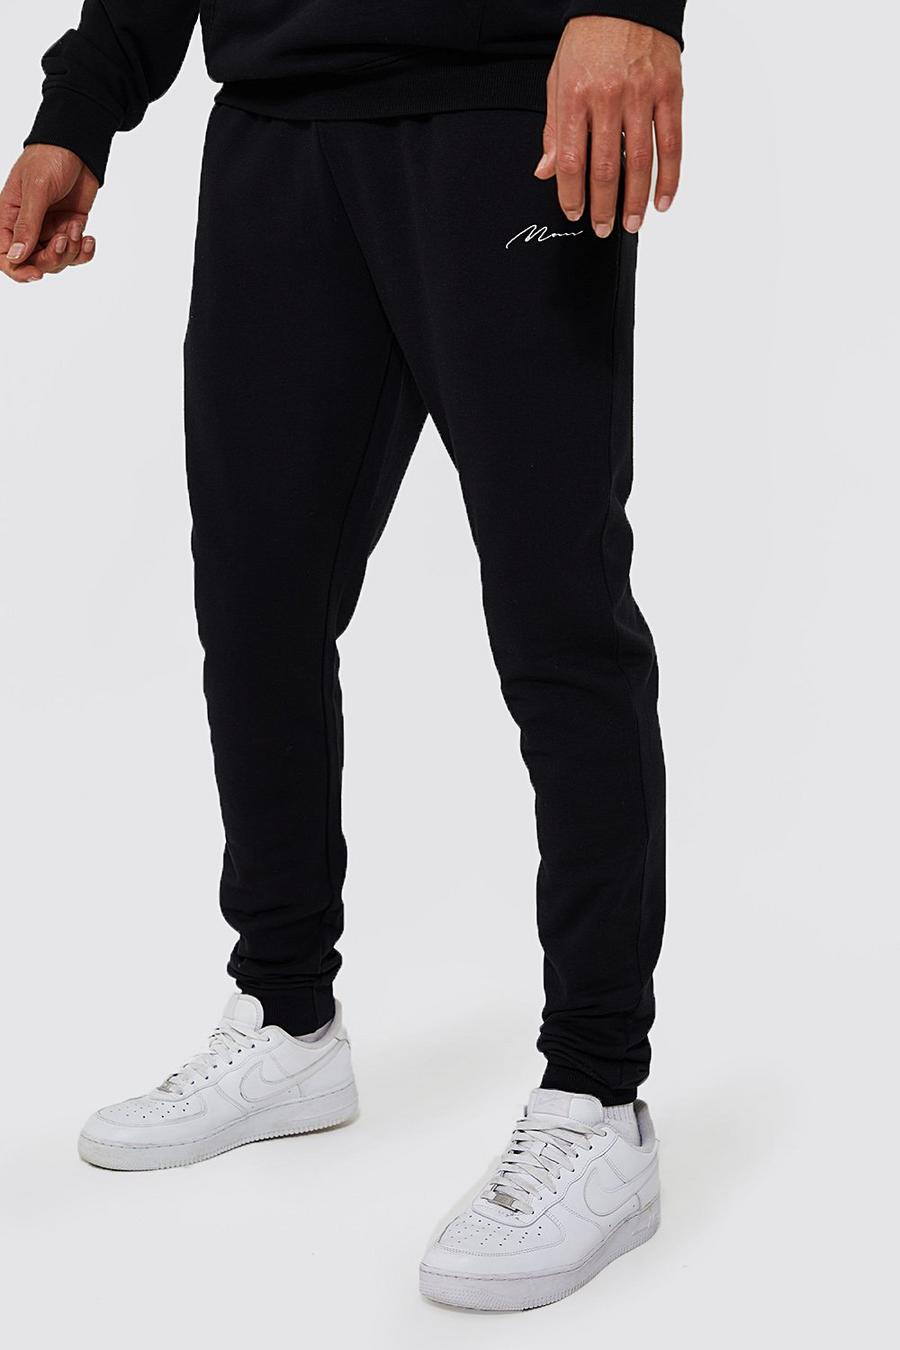 Black Tall Man Skinny Jogger with REEL Cotton image number 1